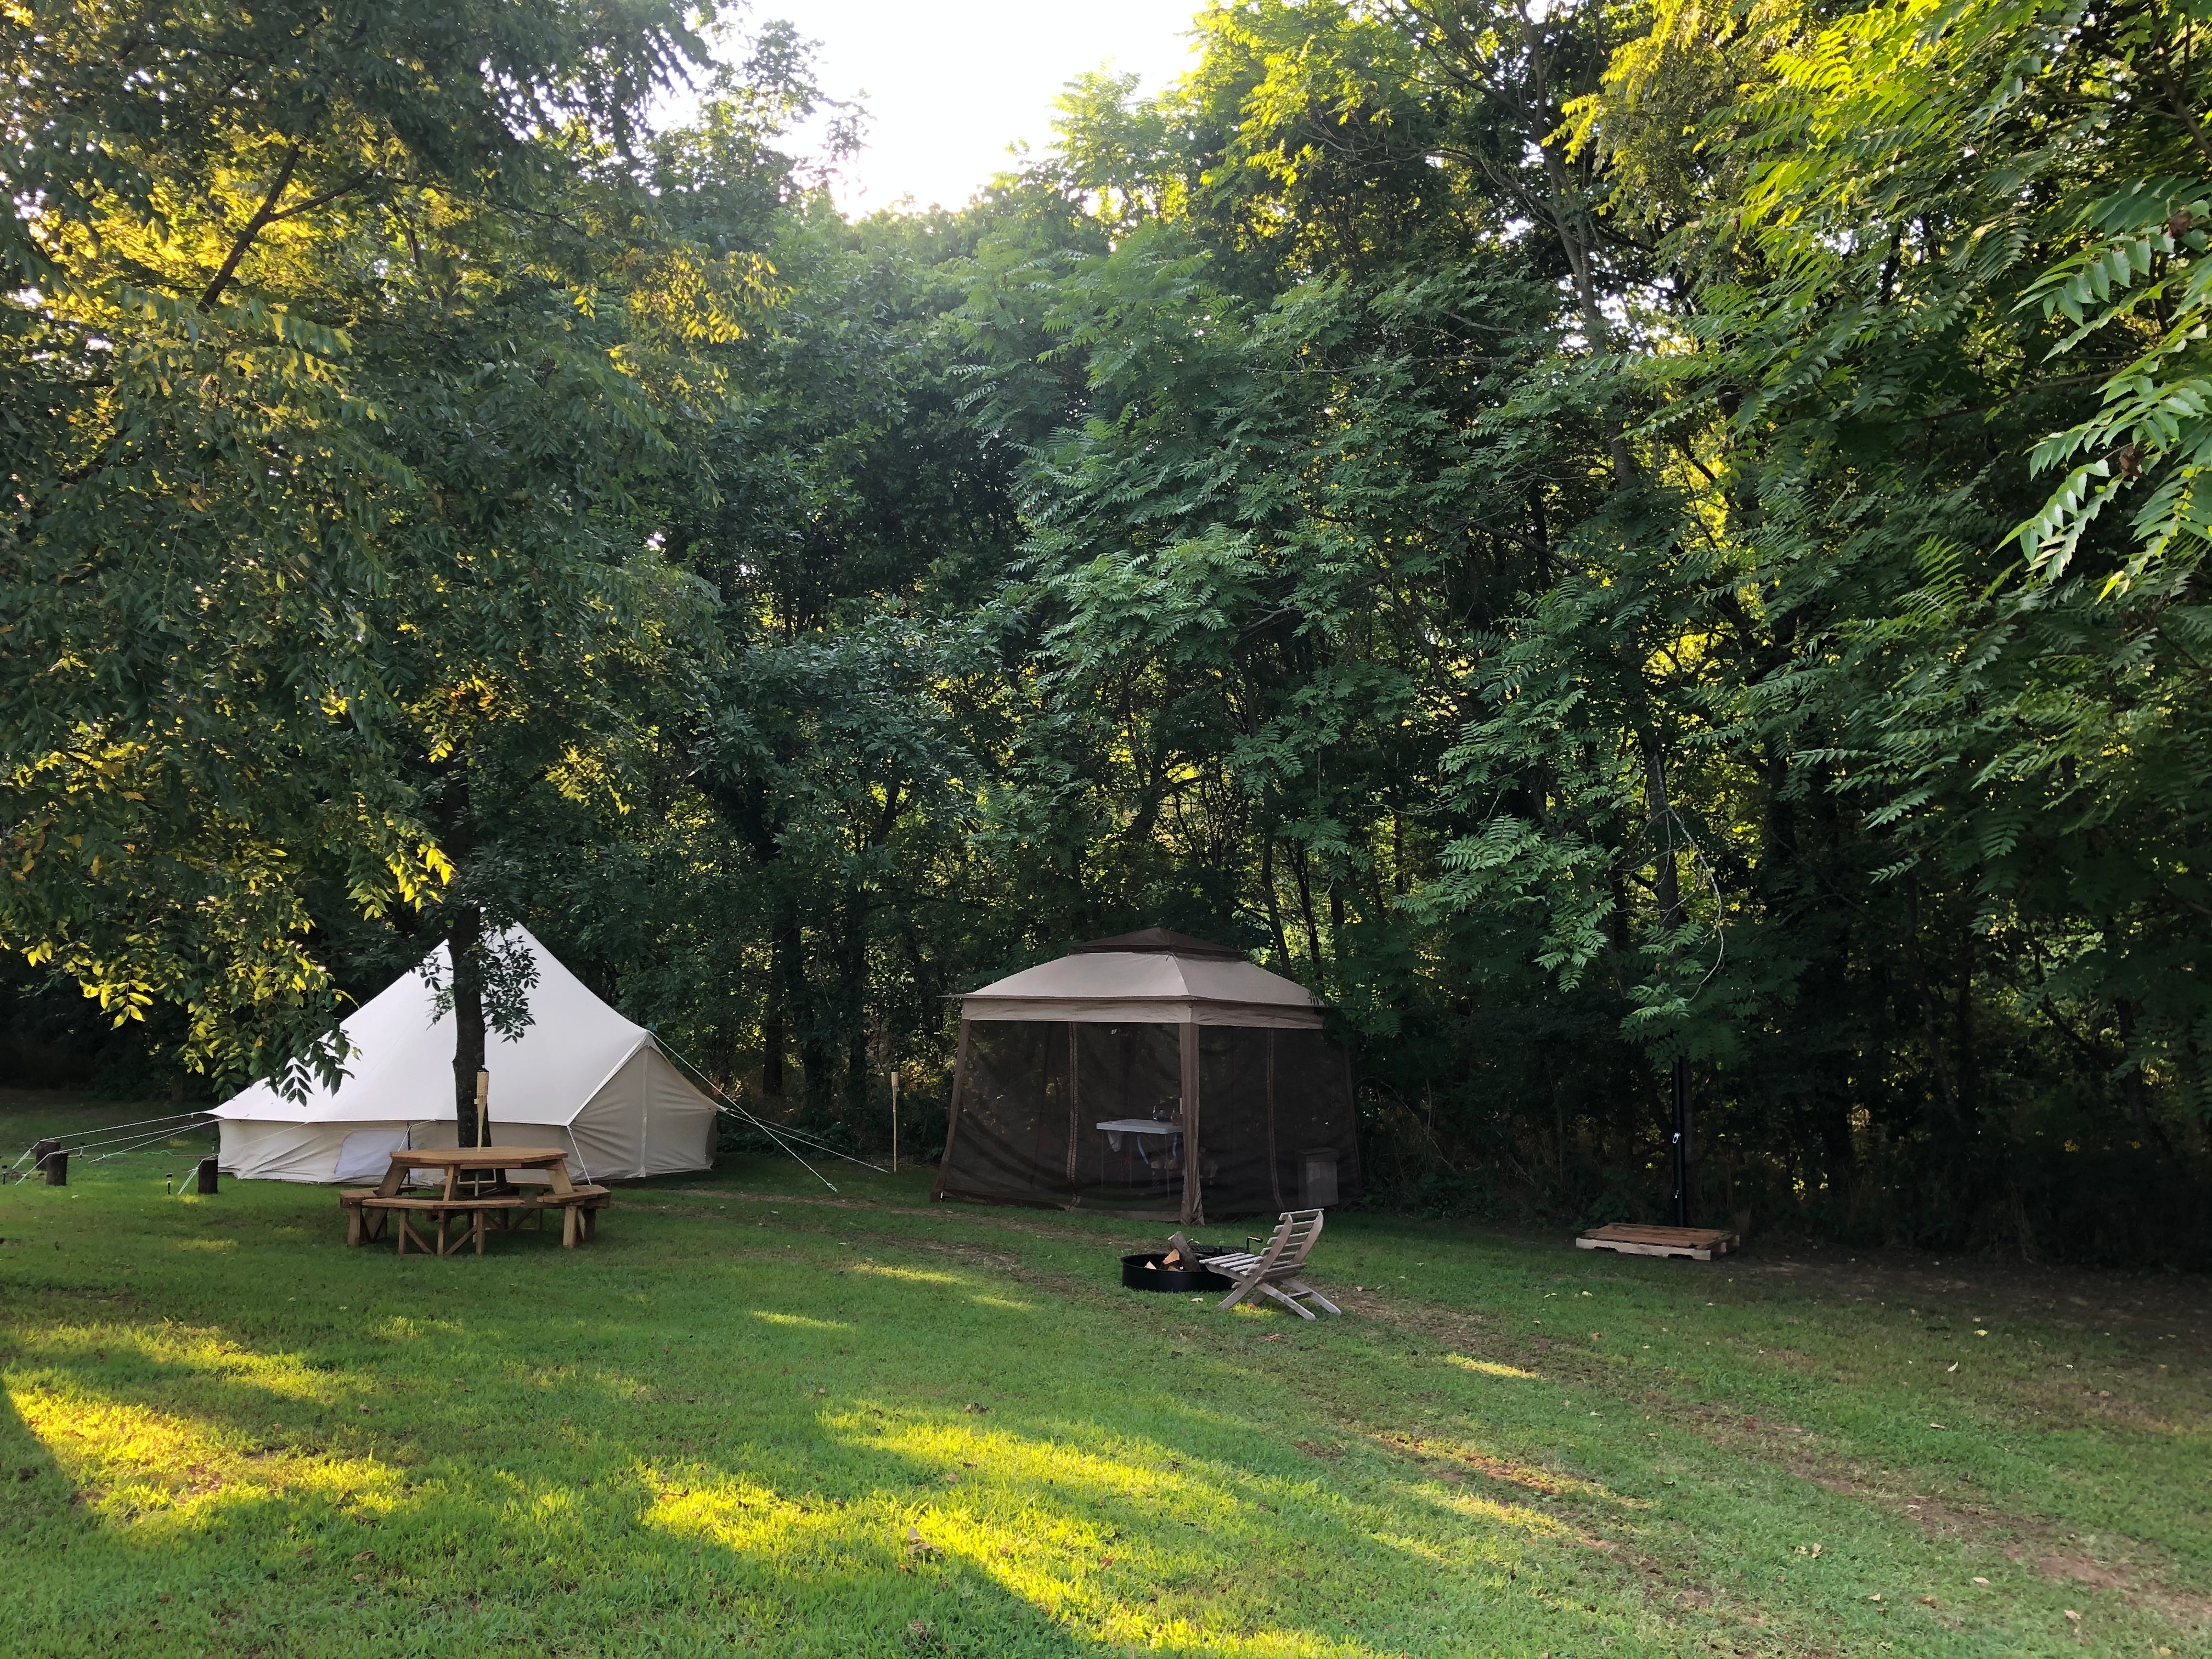 Beautiful shady campsite right by the river. Everything you need to enjoy a week or weekend by water!